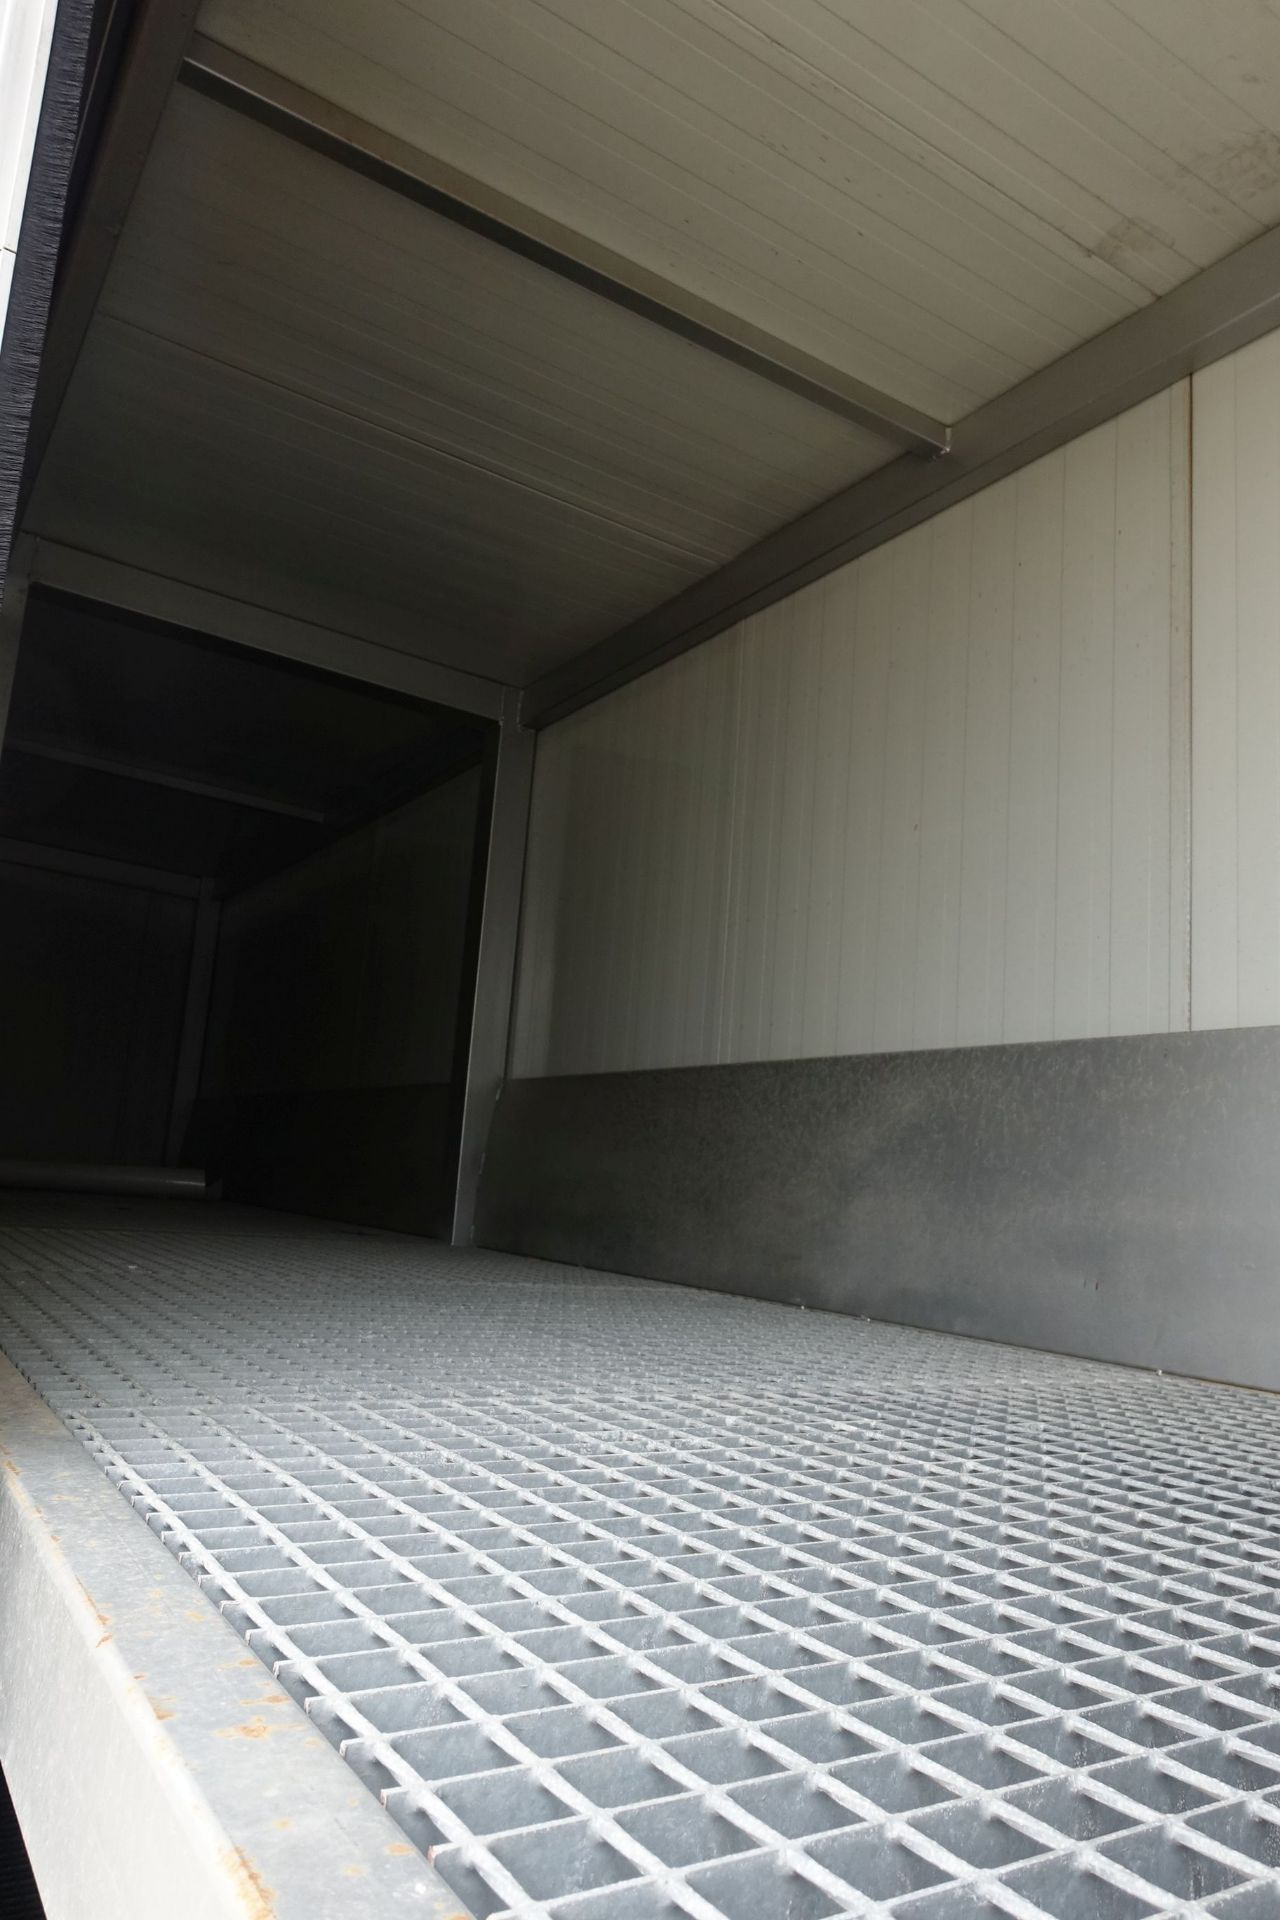 Intracon Chilled Container, 9m Long x 1.5m Deep x 3m High (aproximaely) with MDH-NF-2034A Chiller, - Image 9 of 12